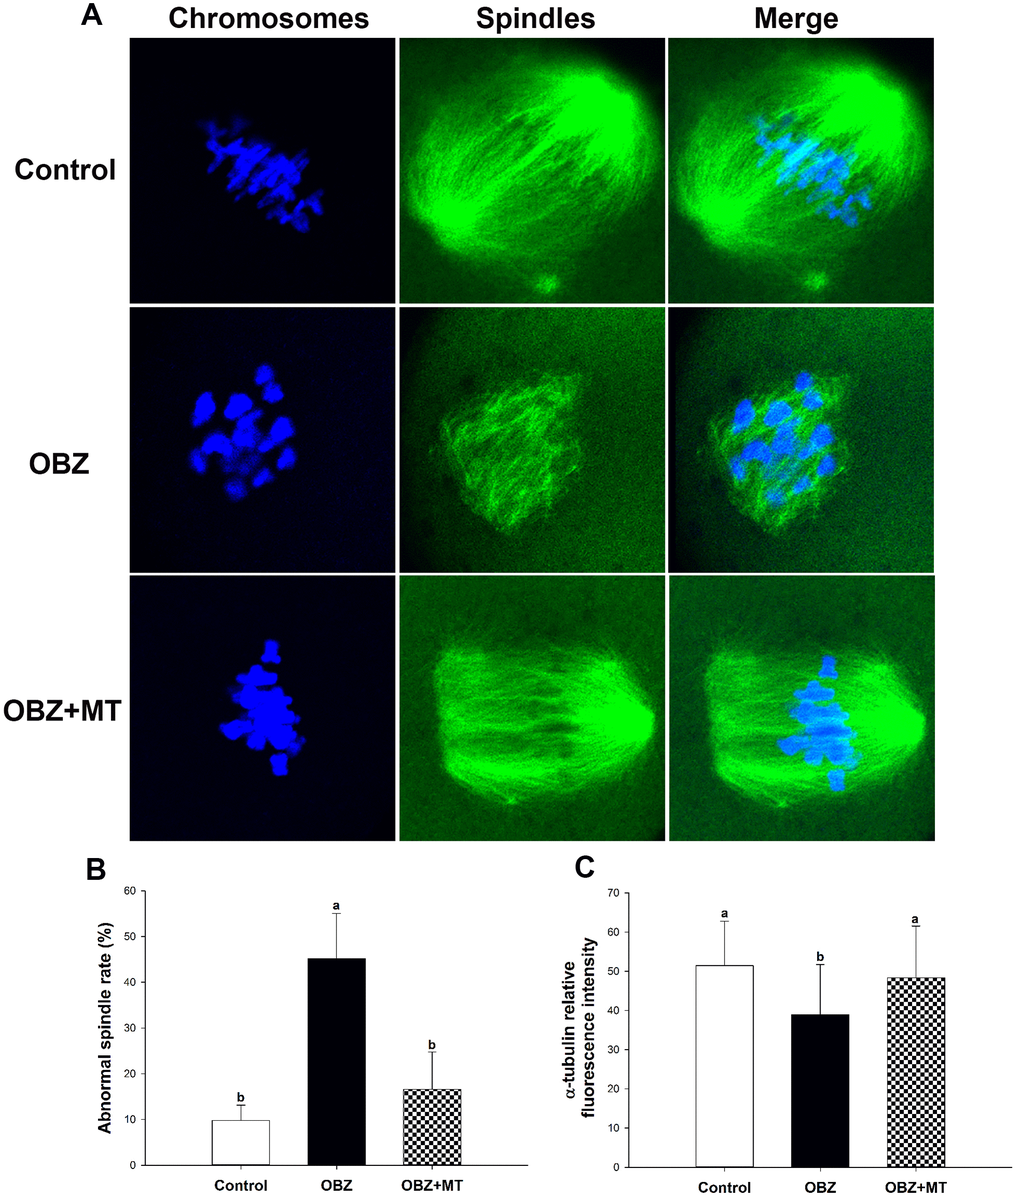 Effects of melatonin on spindle formation and chromosome alignment in OBZ-exposed oocytes. (A) Representative images of spindle morphologies and chromosome alignment in the control, OBZ-exposed, and melatonin+OBZ-treated oocytes. Green, α-tubulin; blue, DNA. (B) The rate of abnormal spindles in each treatment group. (C) Fluorescence intensity analysis of α-tubulin in the control, OBZ-exposed, and melatonin+OBZ-treated oocytes. Values indicated by different letters are significantly different (P 